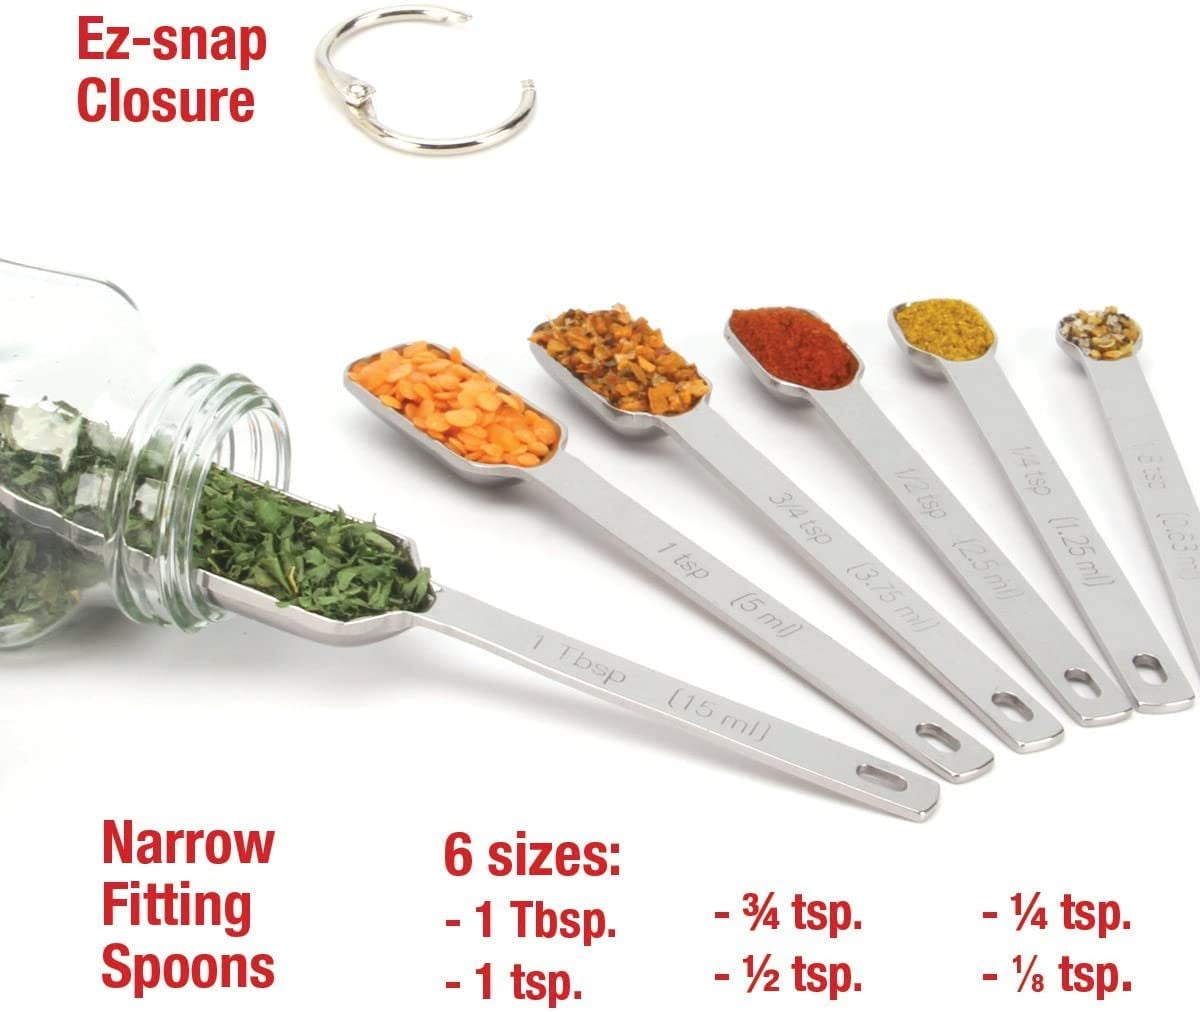 Rainspire Heavy Duty Measuring Spoons Set Stainless Steel, Metal Measuring  Cups and Spoons Set for Dry or Liquid, Fits in Spice Jar, Home Gadgets